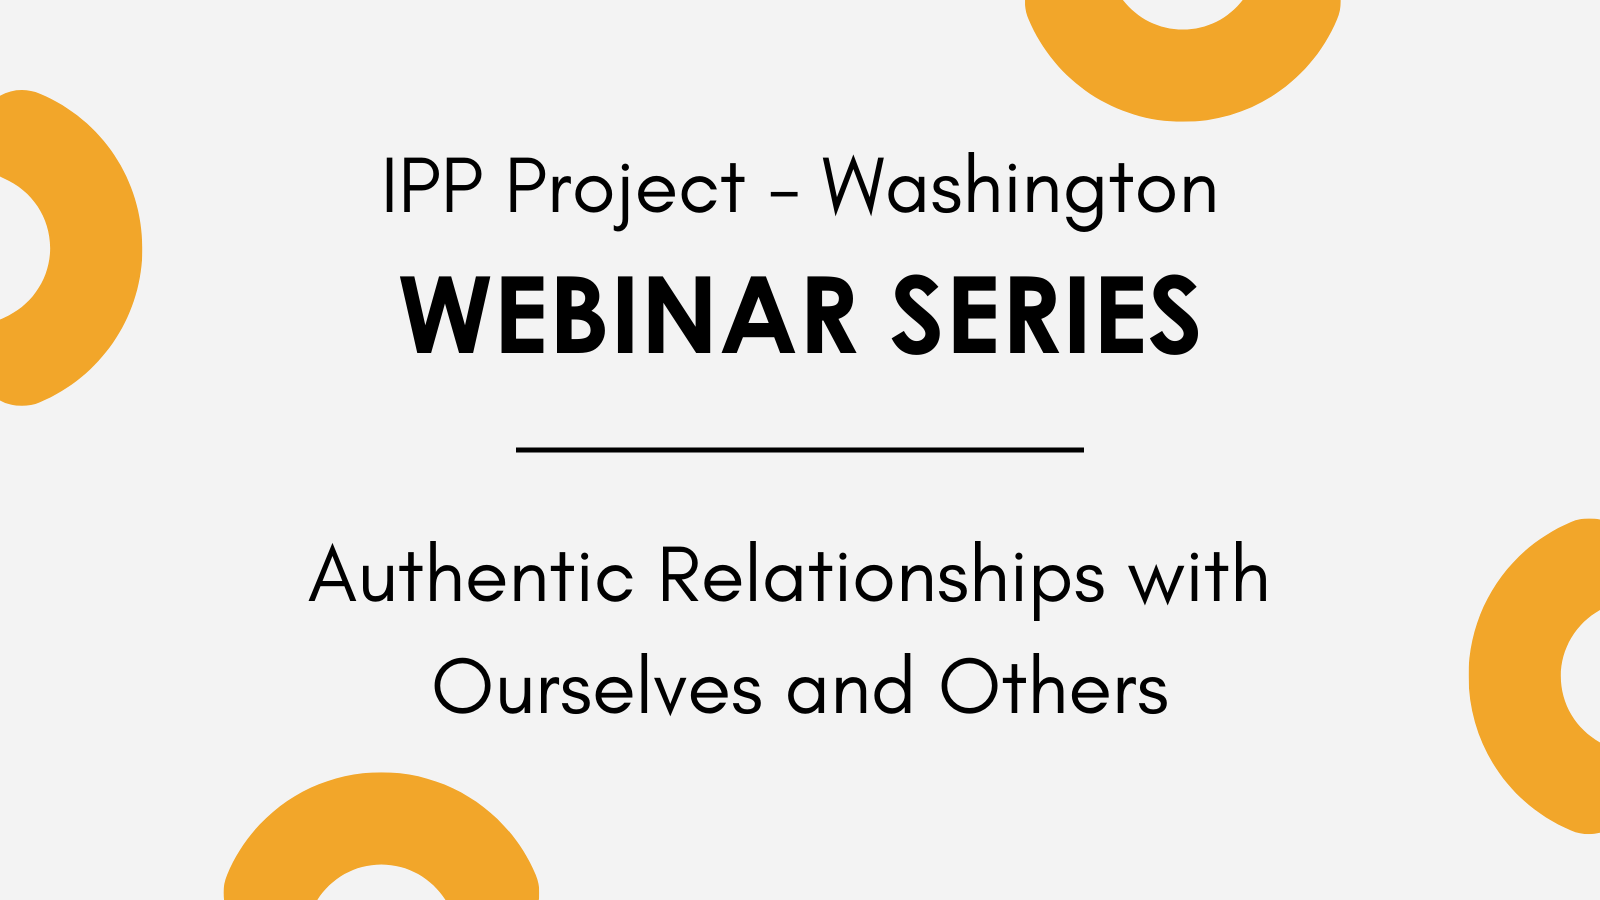 This interactive webinar will provide participants with the foundational components needed to experience authentic relationships to identify social-emotional learning skills.